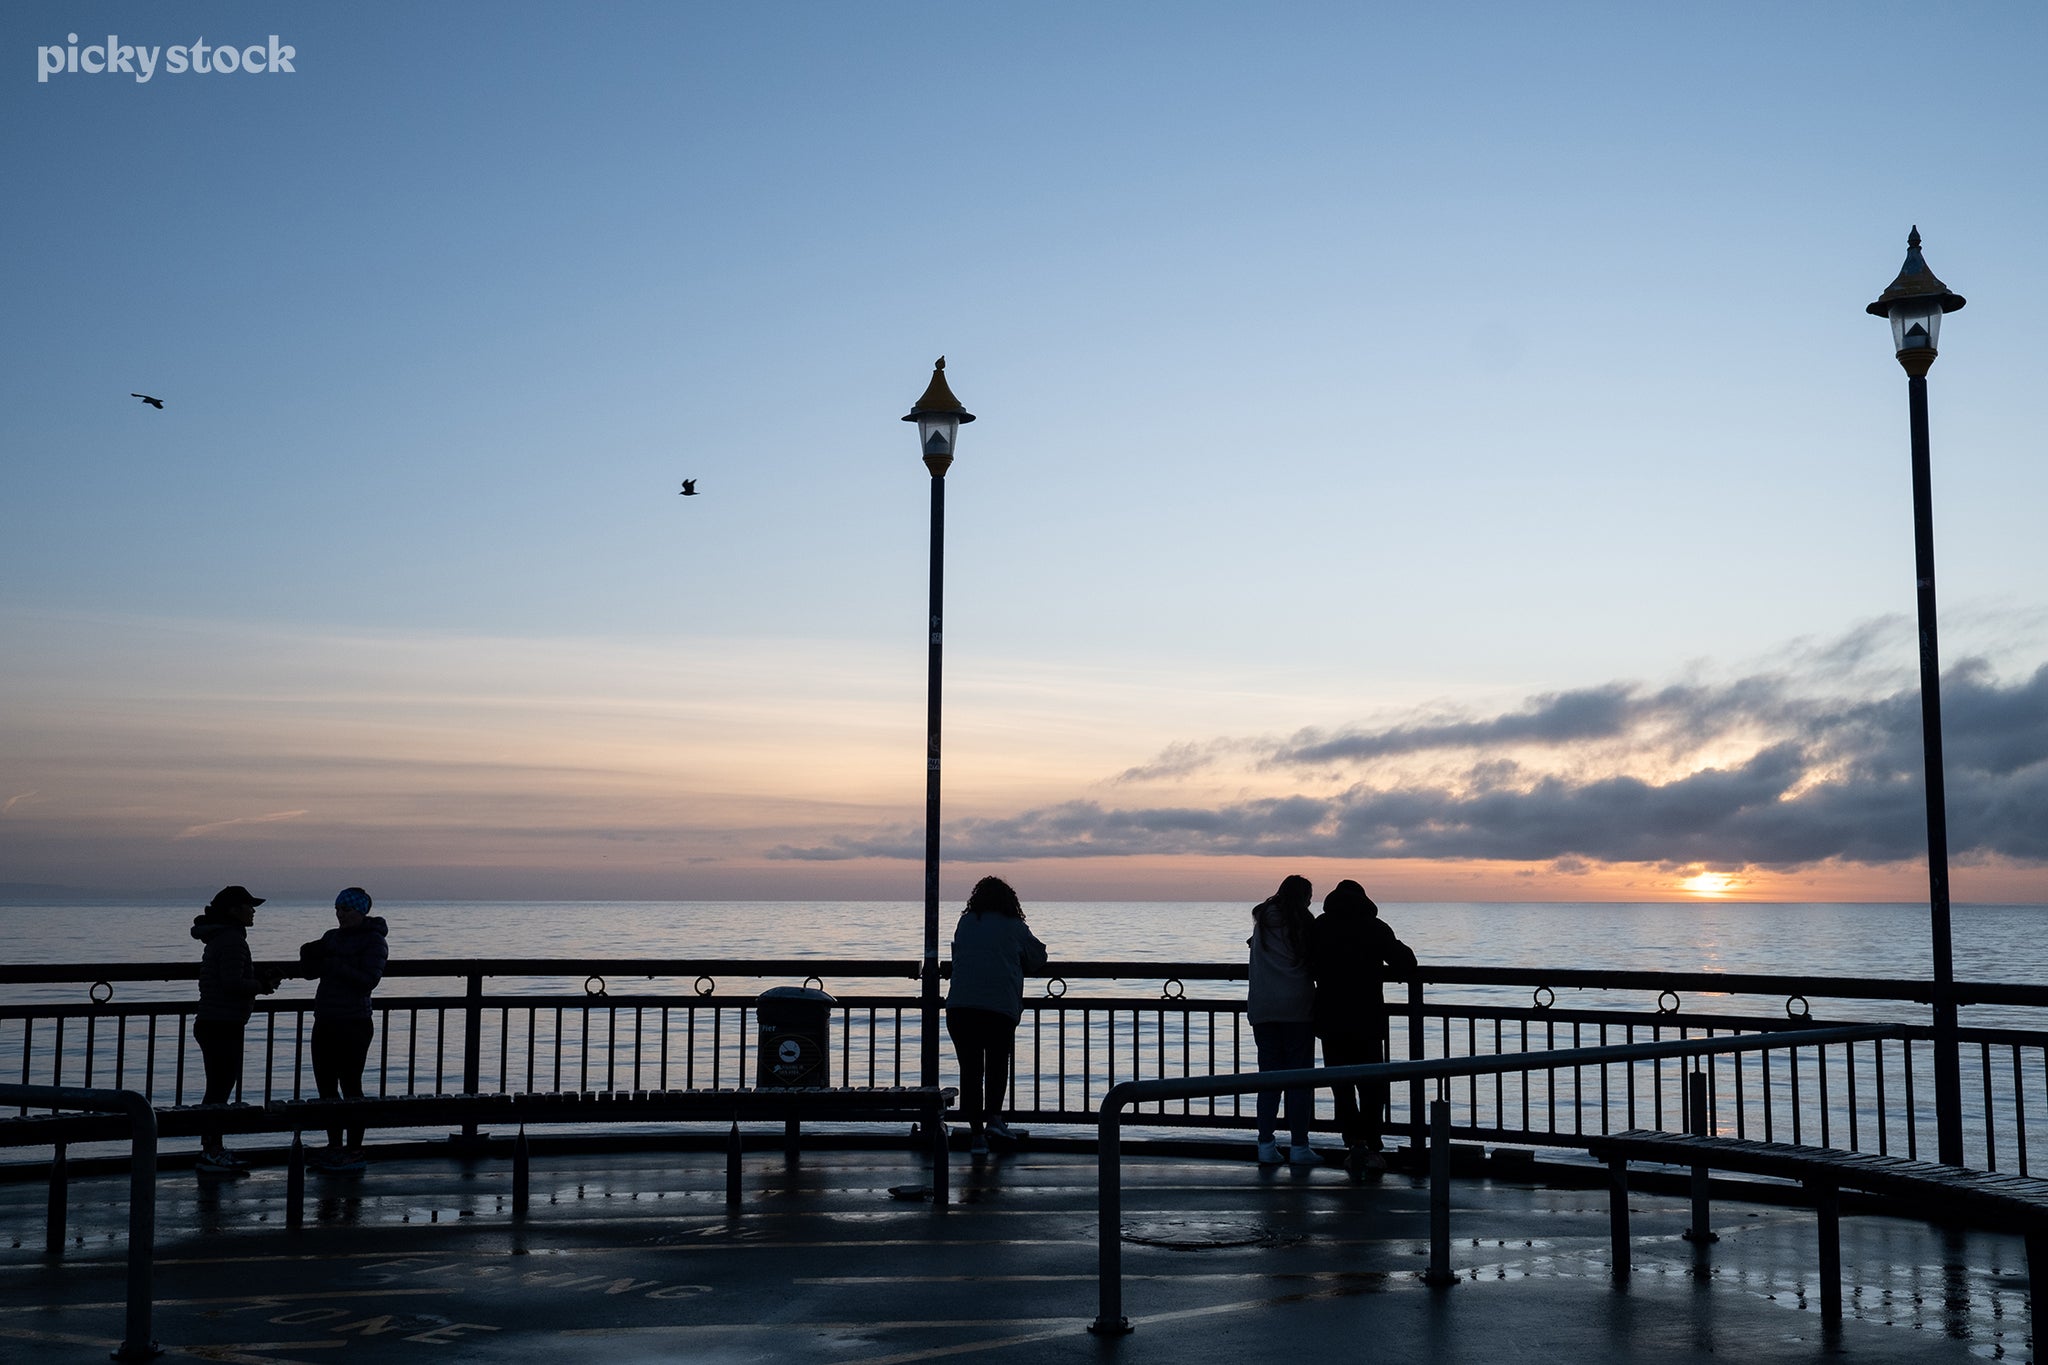 Landscape of people on a wet concrete pier in the afternoon, tall lanterns stand extinguished. Sea birds loft about and clouds crawl across the water as the sun makes its descent.